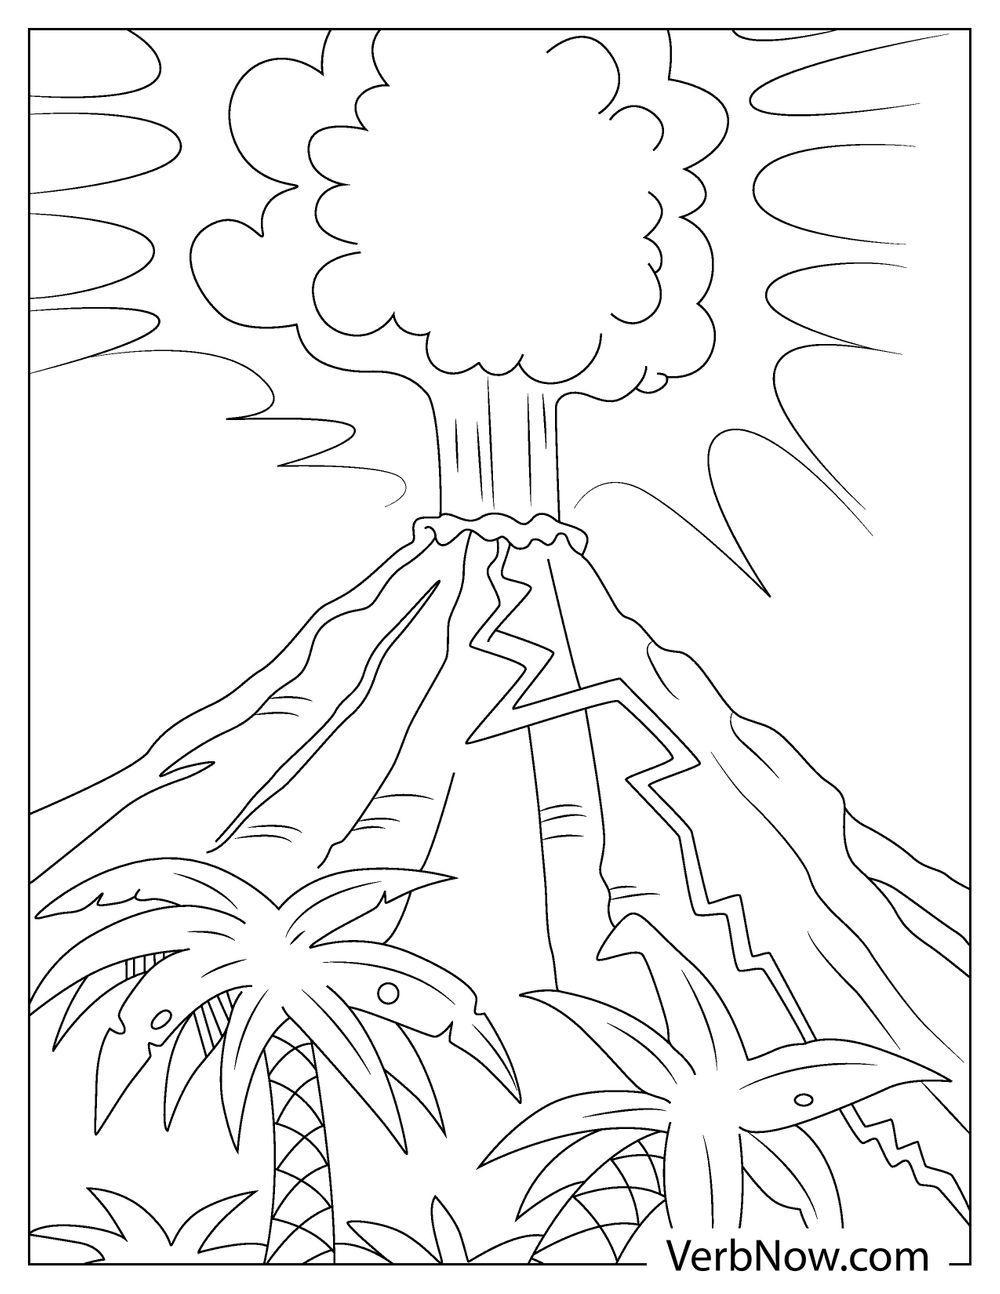 Free VOLCANO Coloring Pages & Book for Download (Printable PDF) - VerbNow